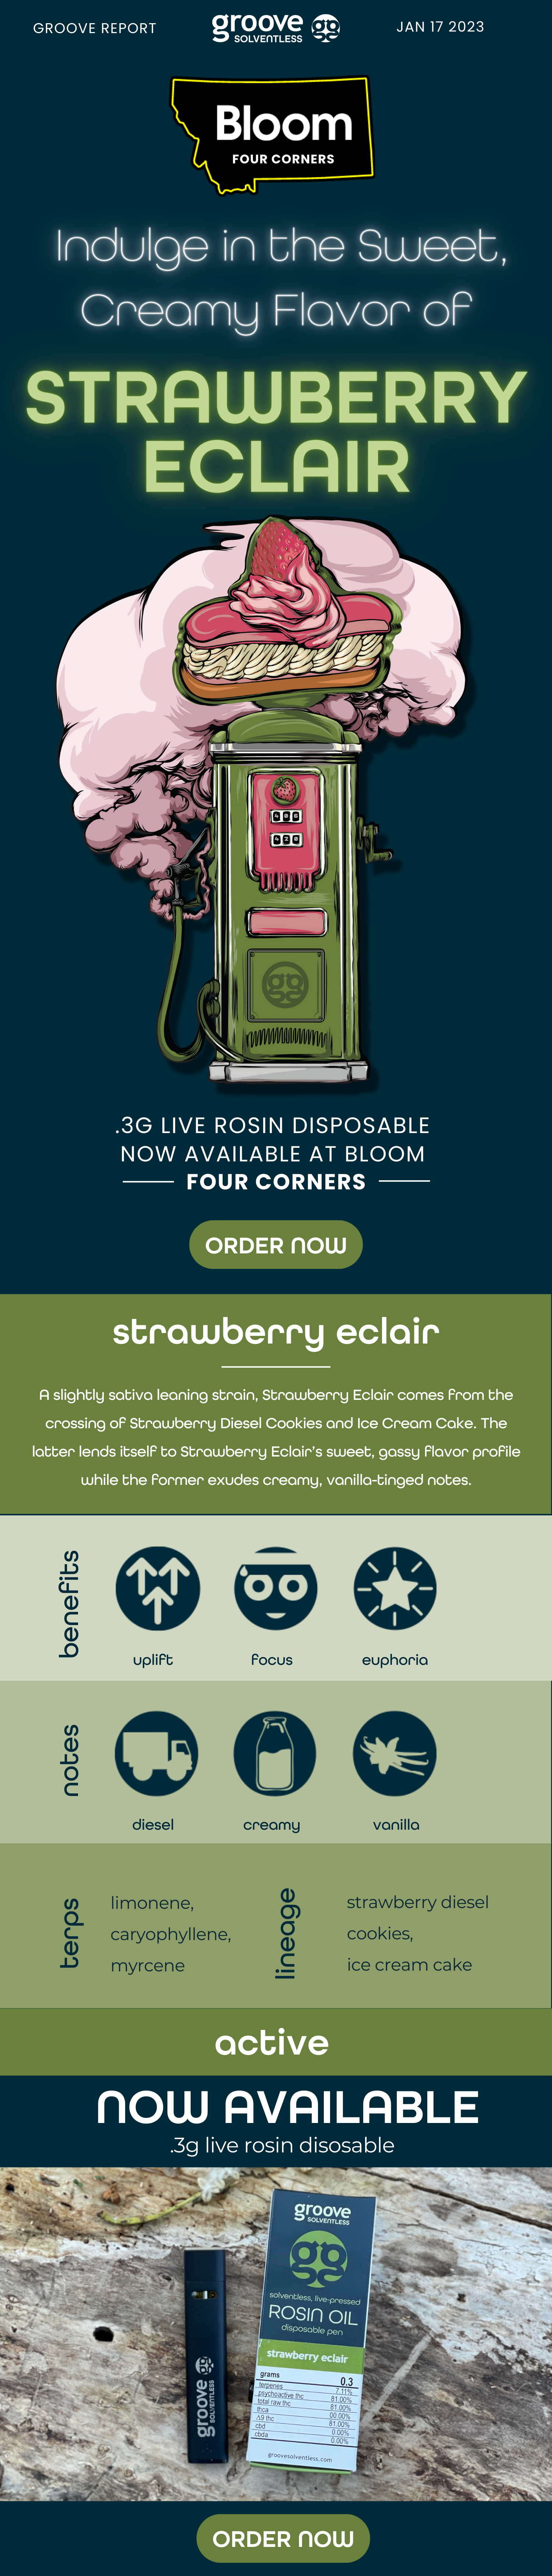 Strawberry Eclair Disposable Now Available at Bloom Four Corners